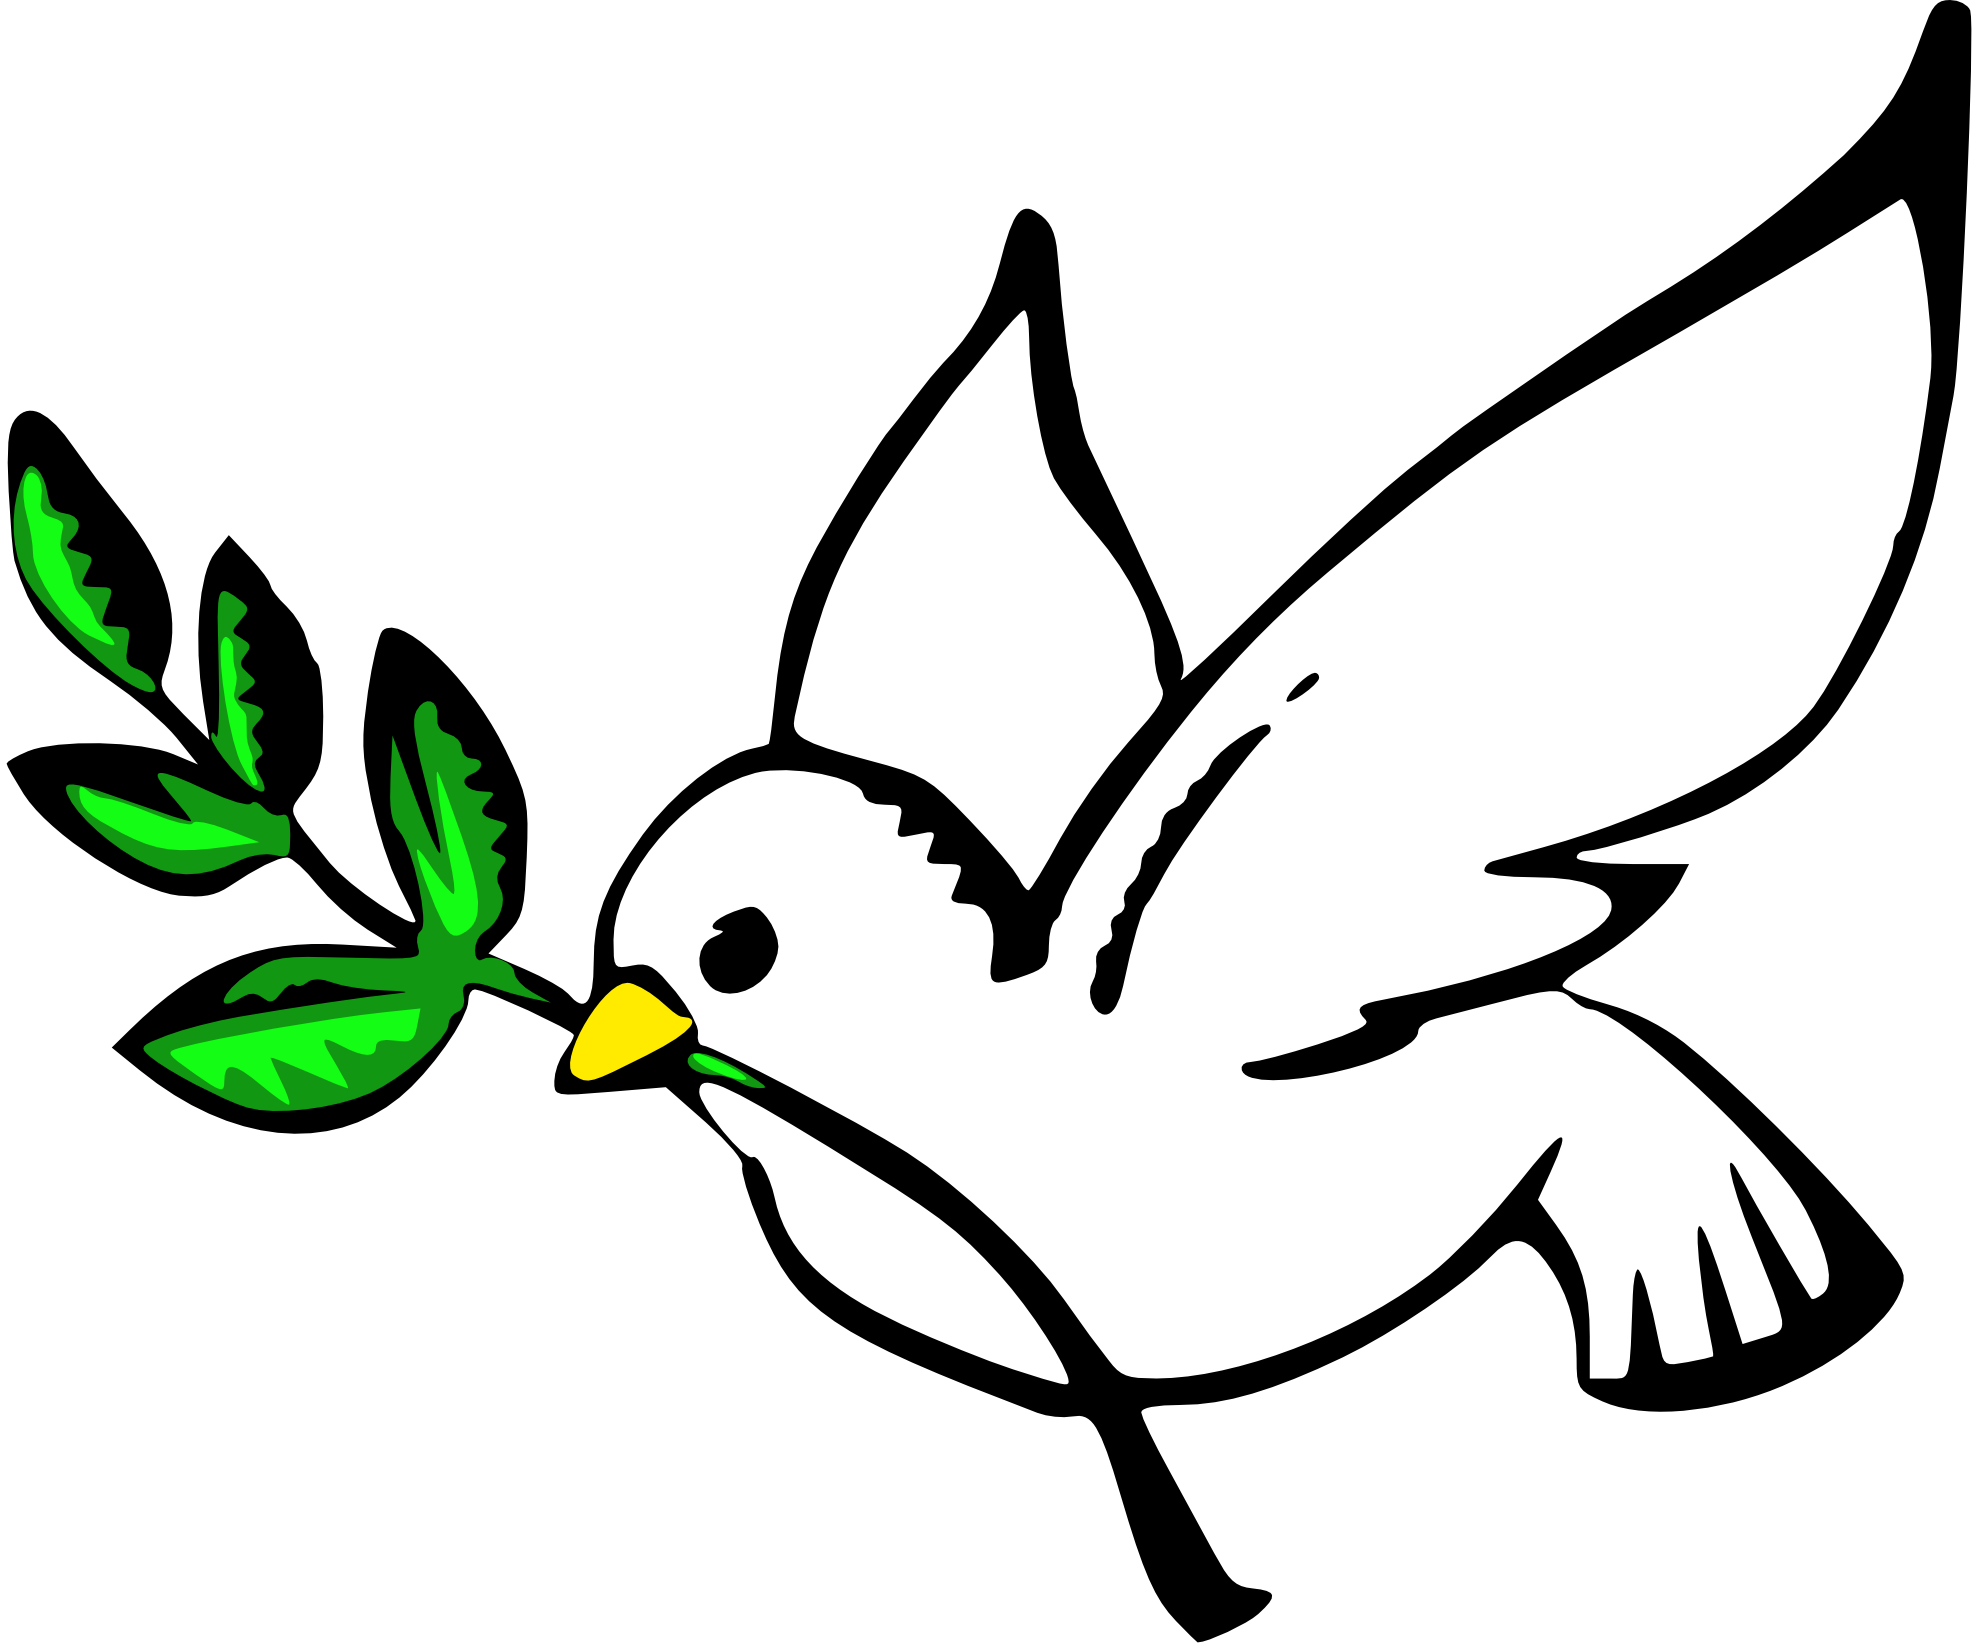 Doves Clip Art Free - Clipart library